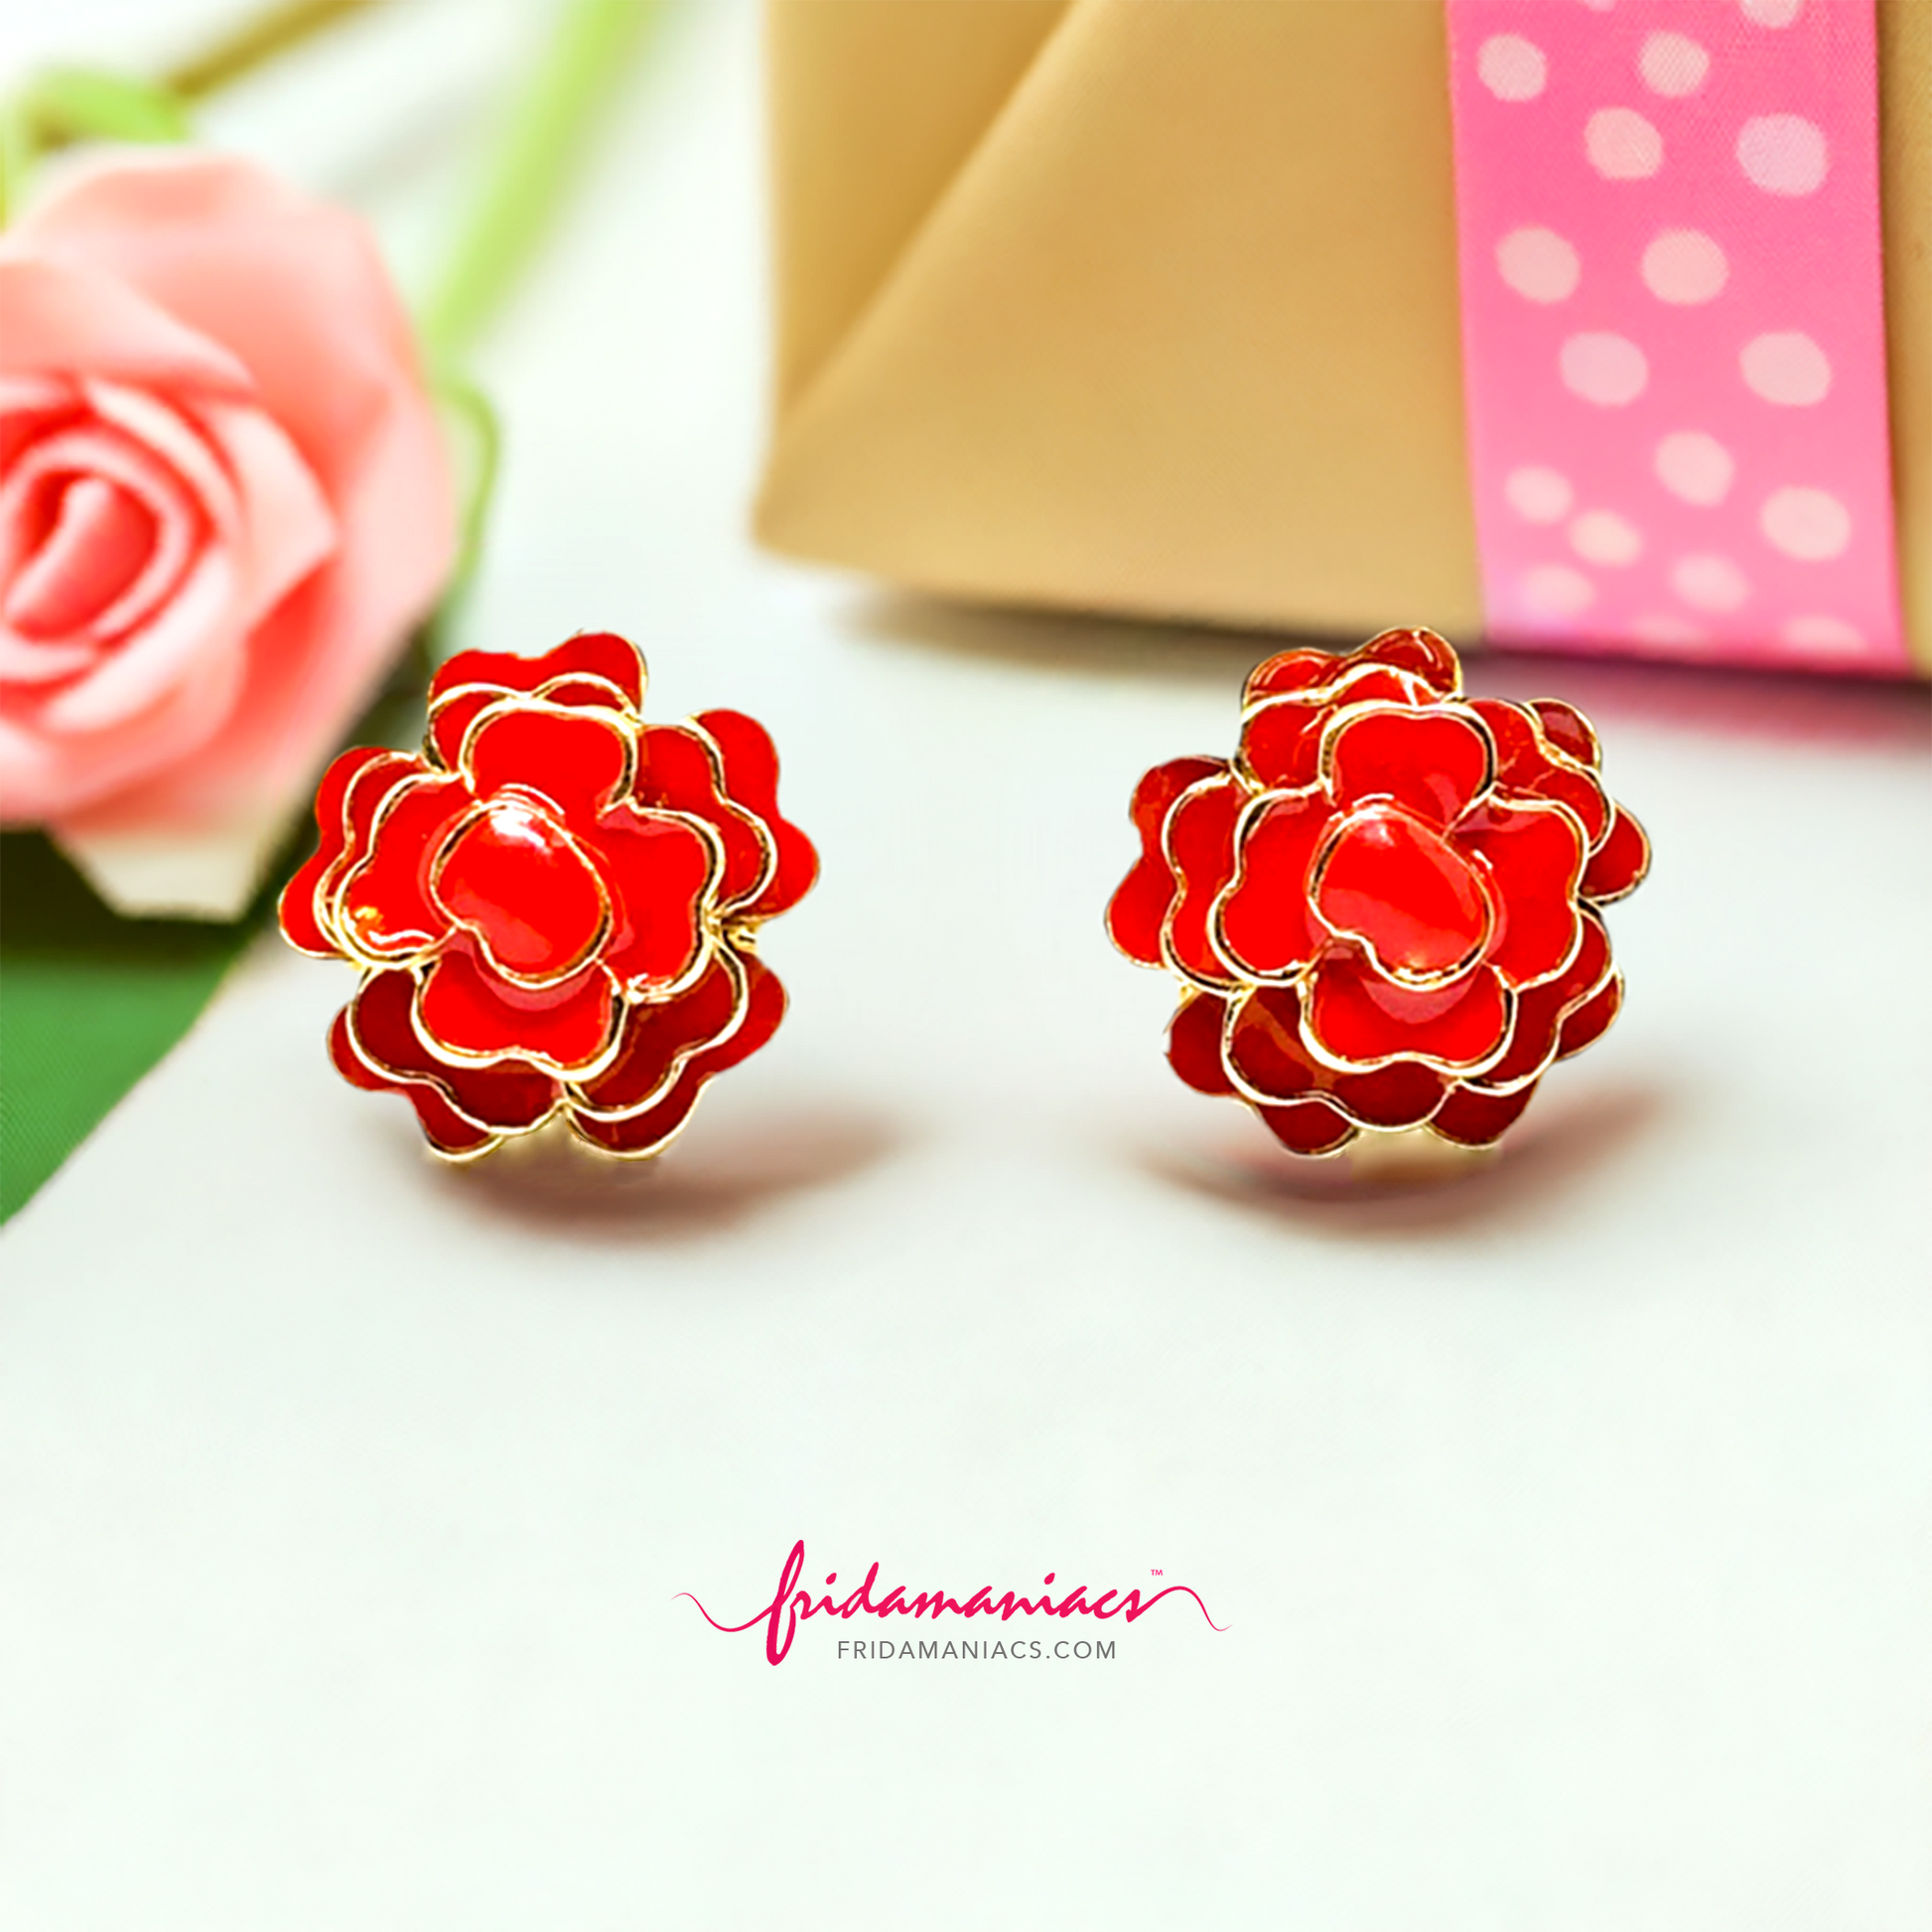 Stud red rose enamel mexican earrings jewelry with golden edges. Frida Kahlo inspired accessories.